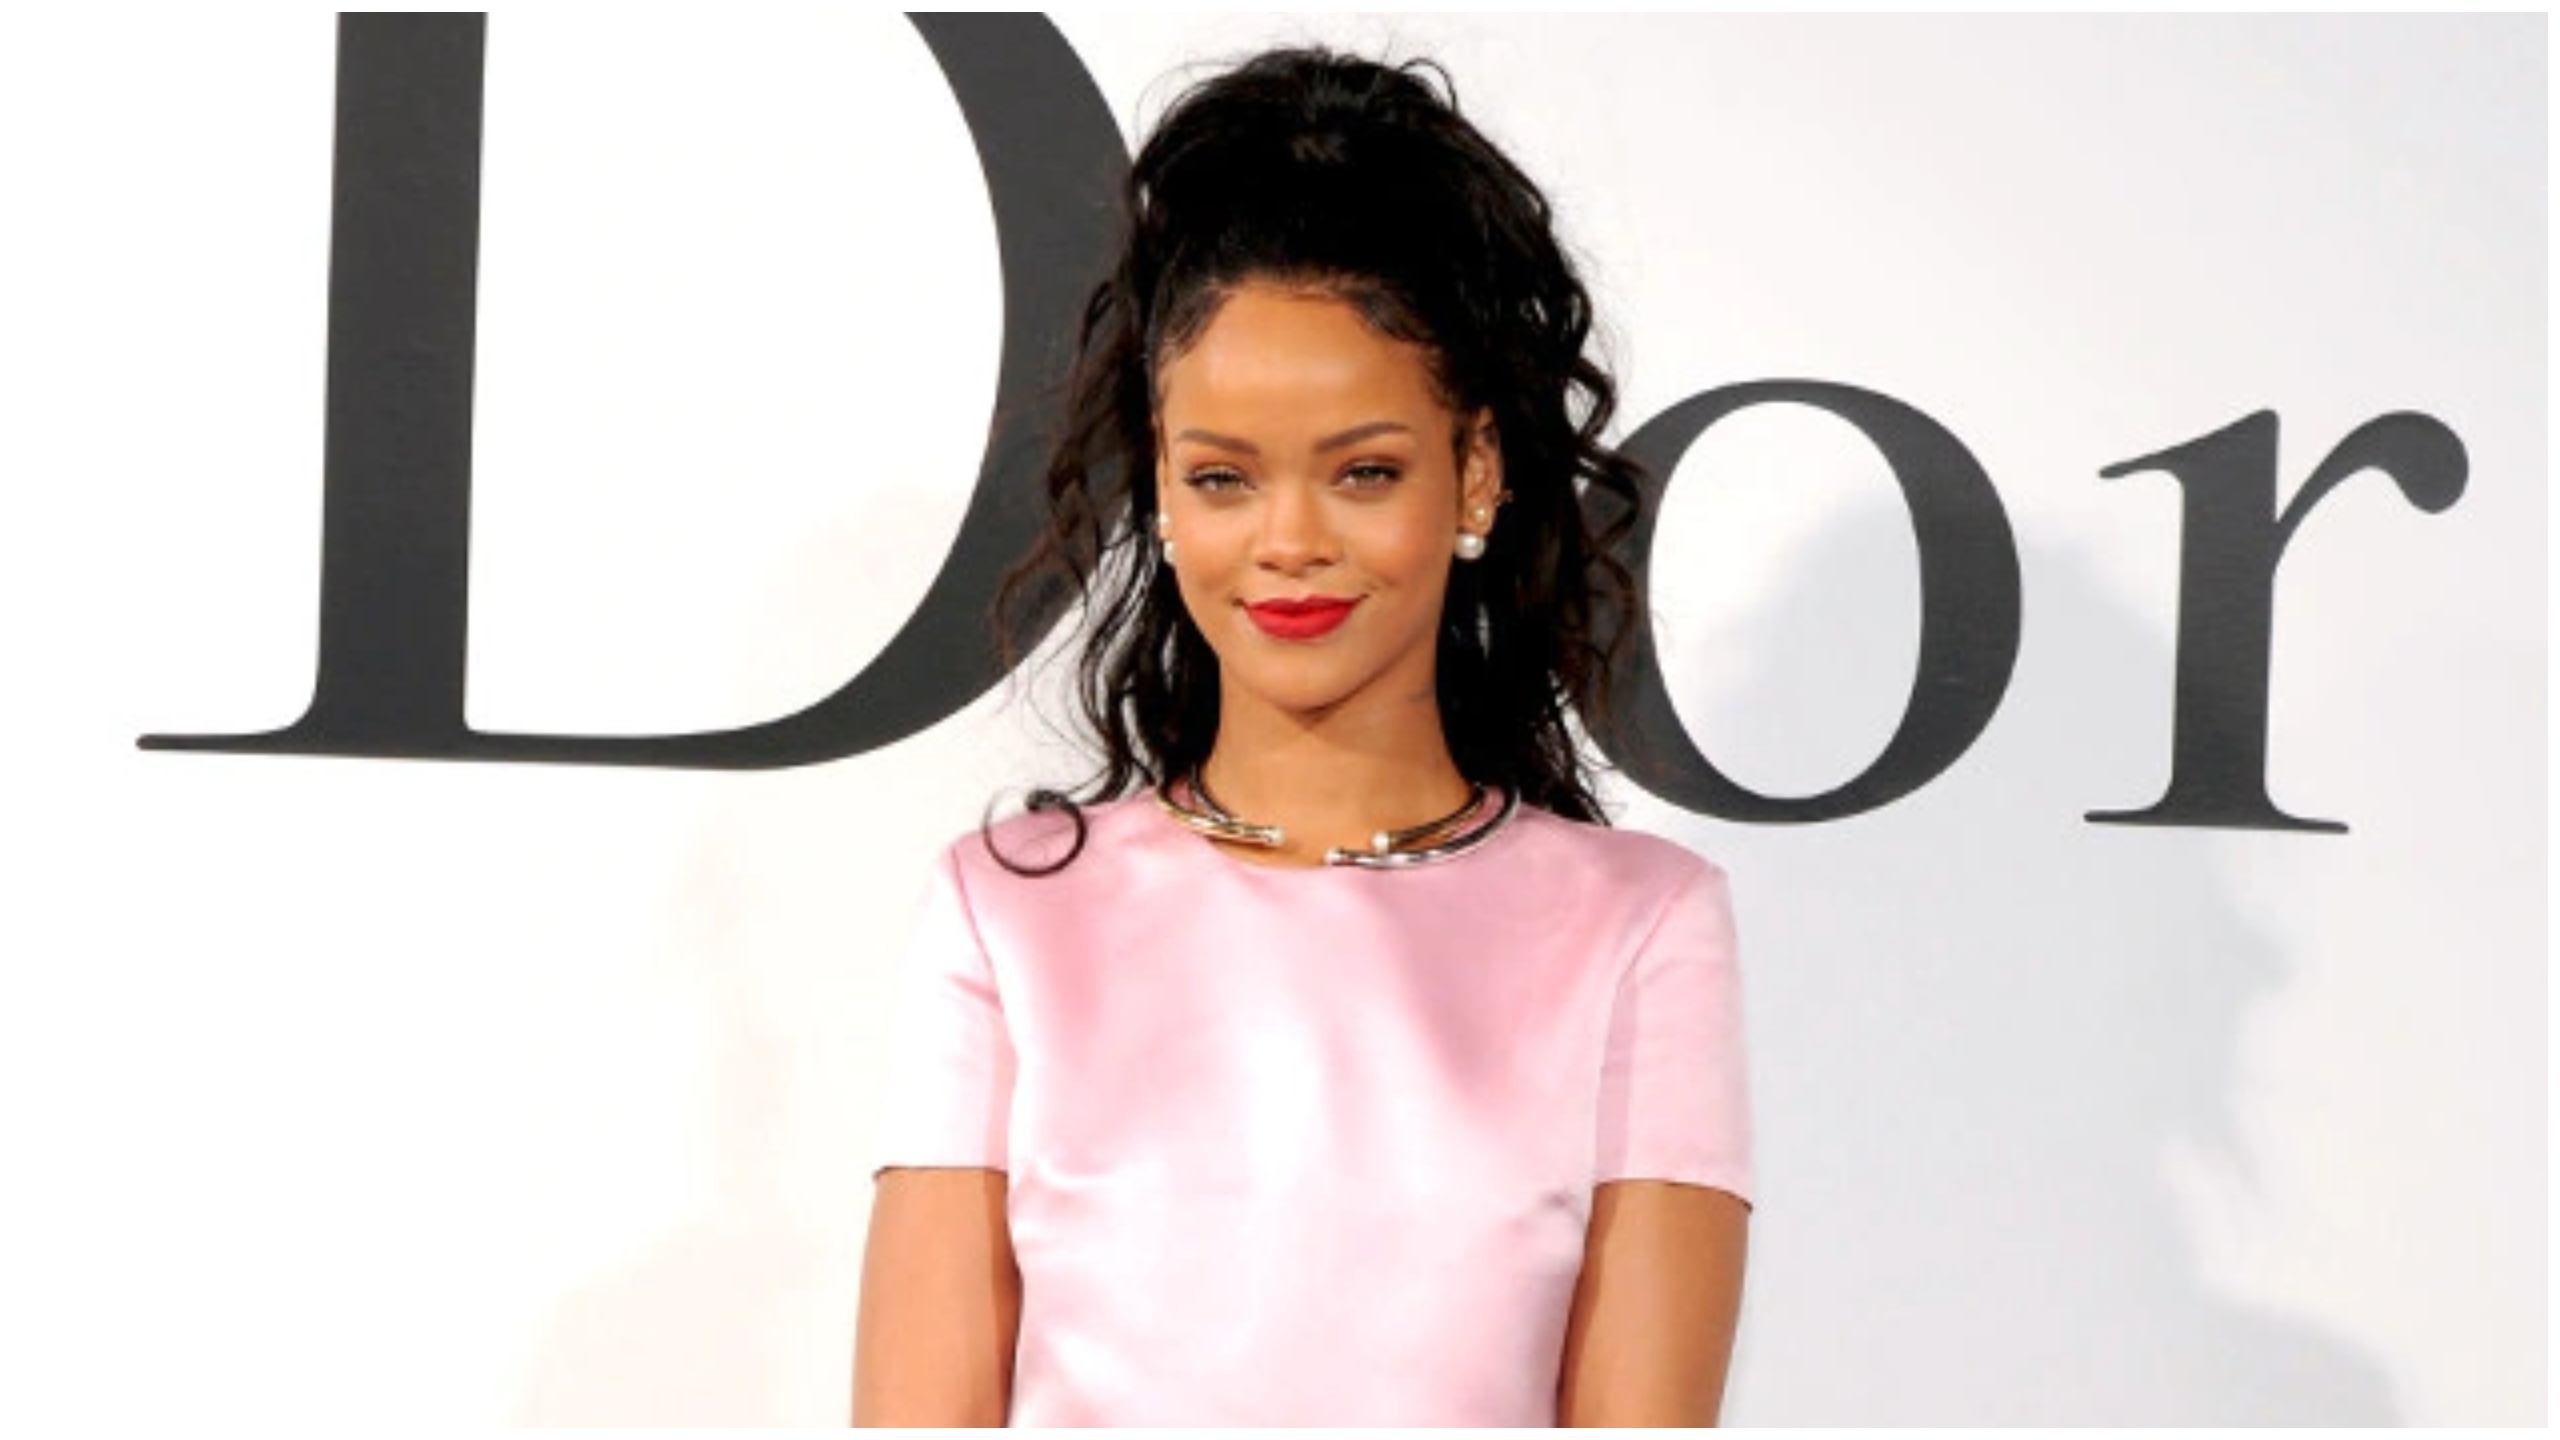 The Unforgettable Day Rihanna Made Fashion History